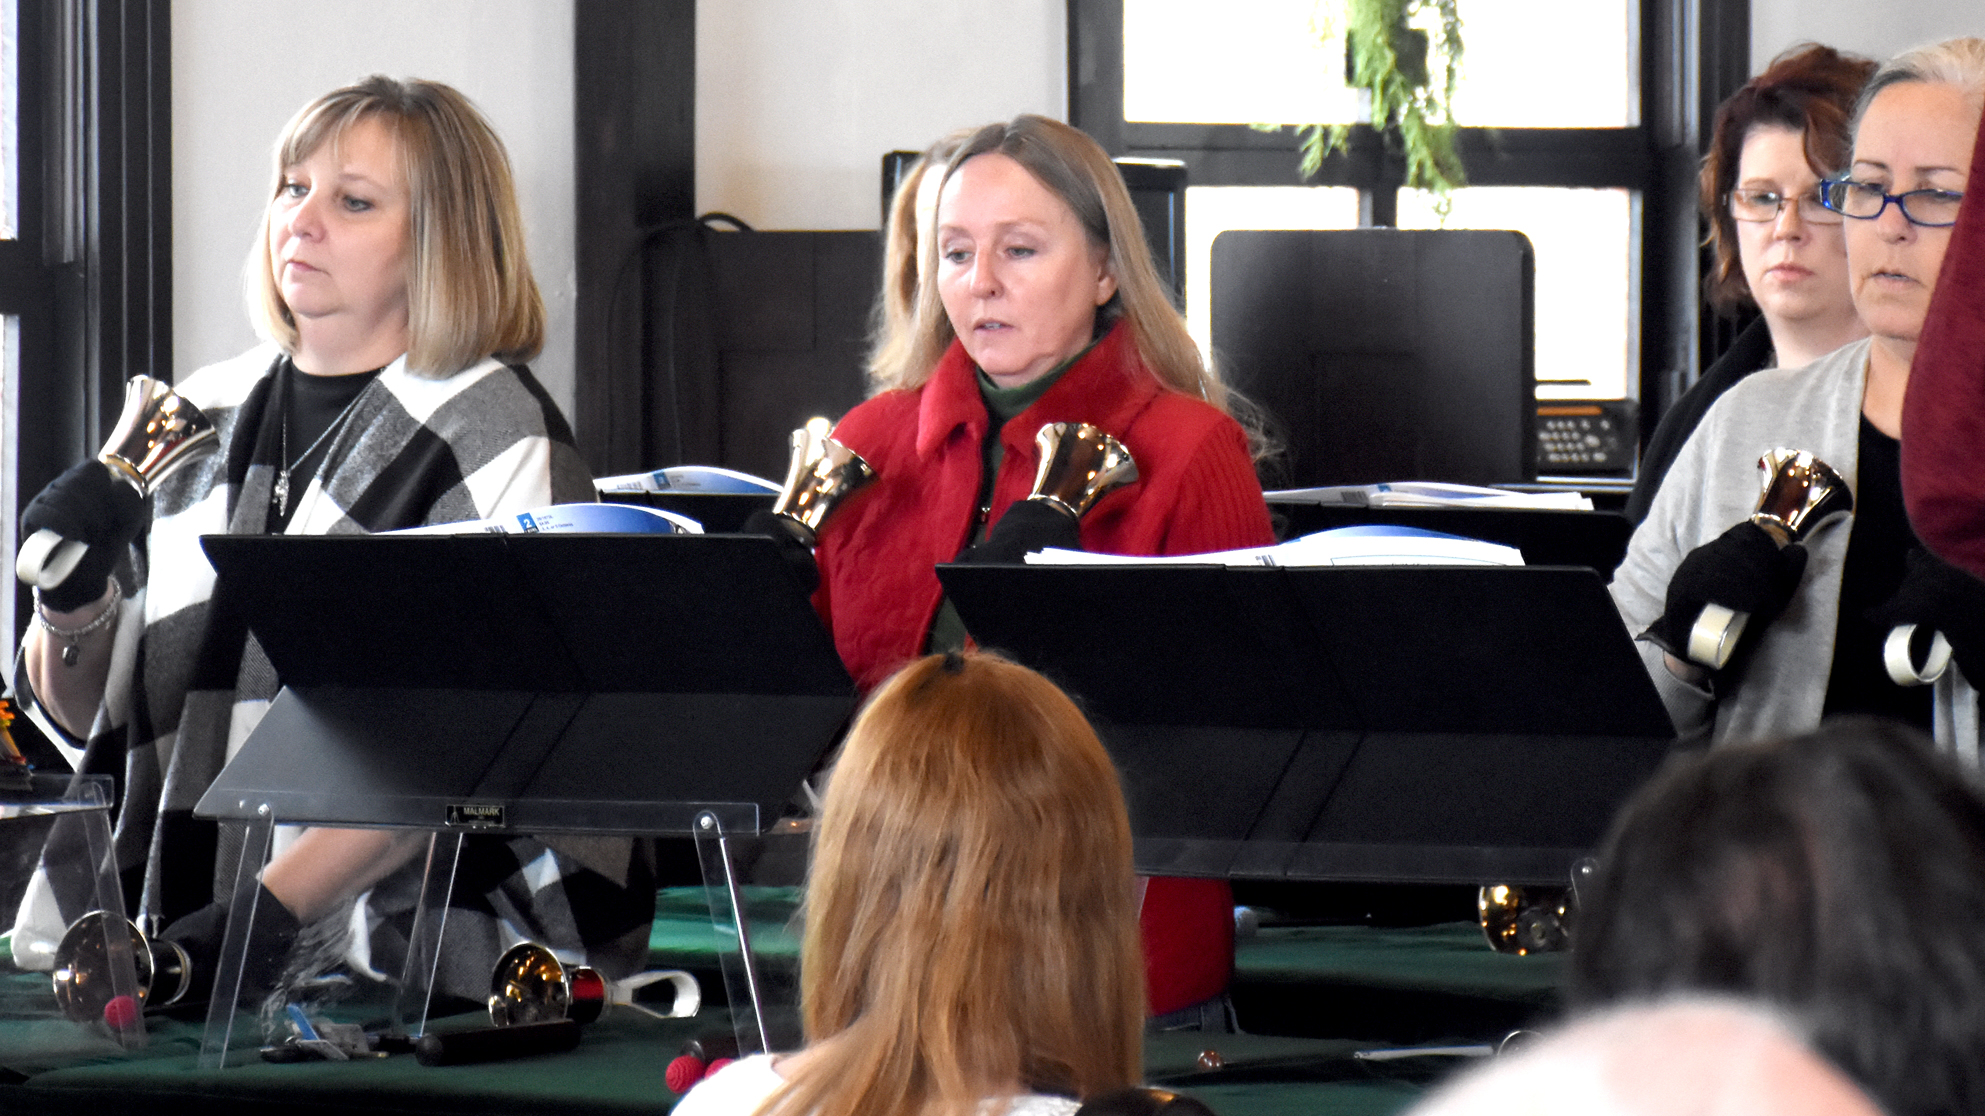 Members of the Agape Handbell Choir from First United Methodist Church present "We Three Kings" Sunday afternoon at the Hometown Christmas program at the Howard County museum in Nashville.